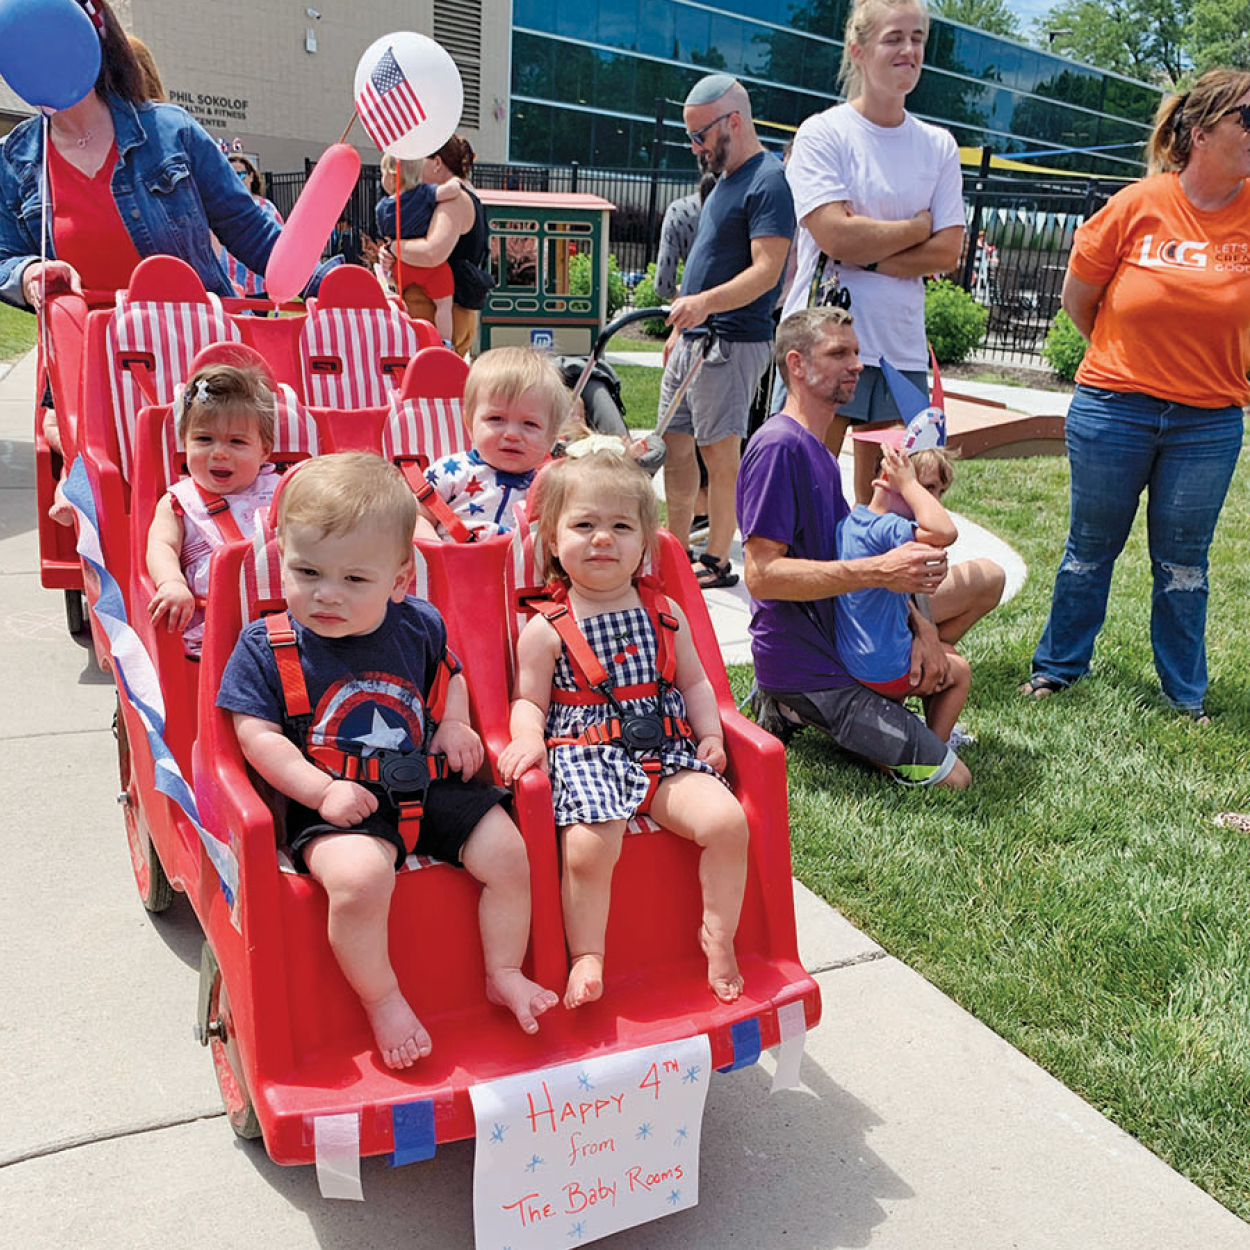 Camp Shemesh: Ages 3-5 - The Jewish Community Center of Omaha